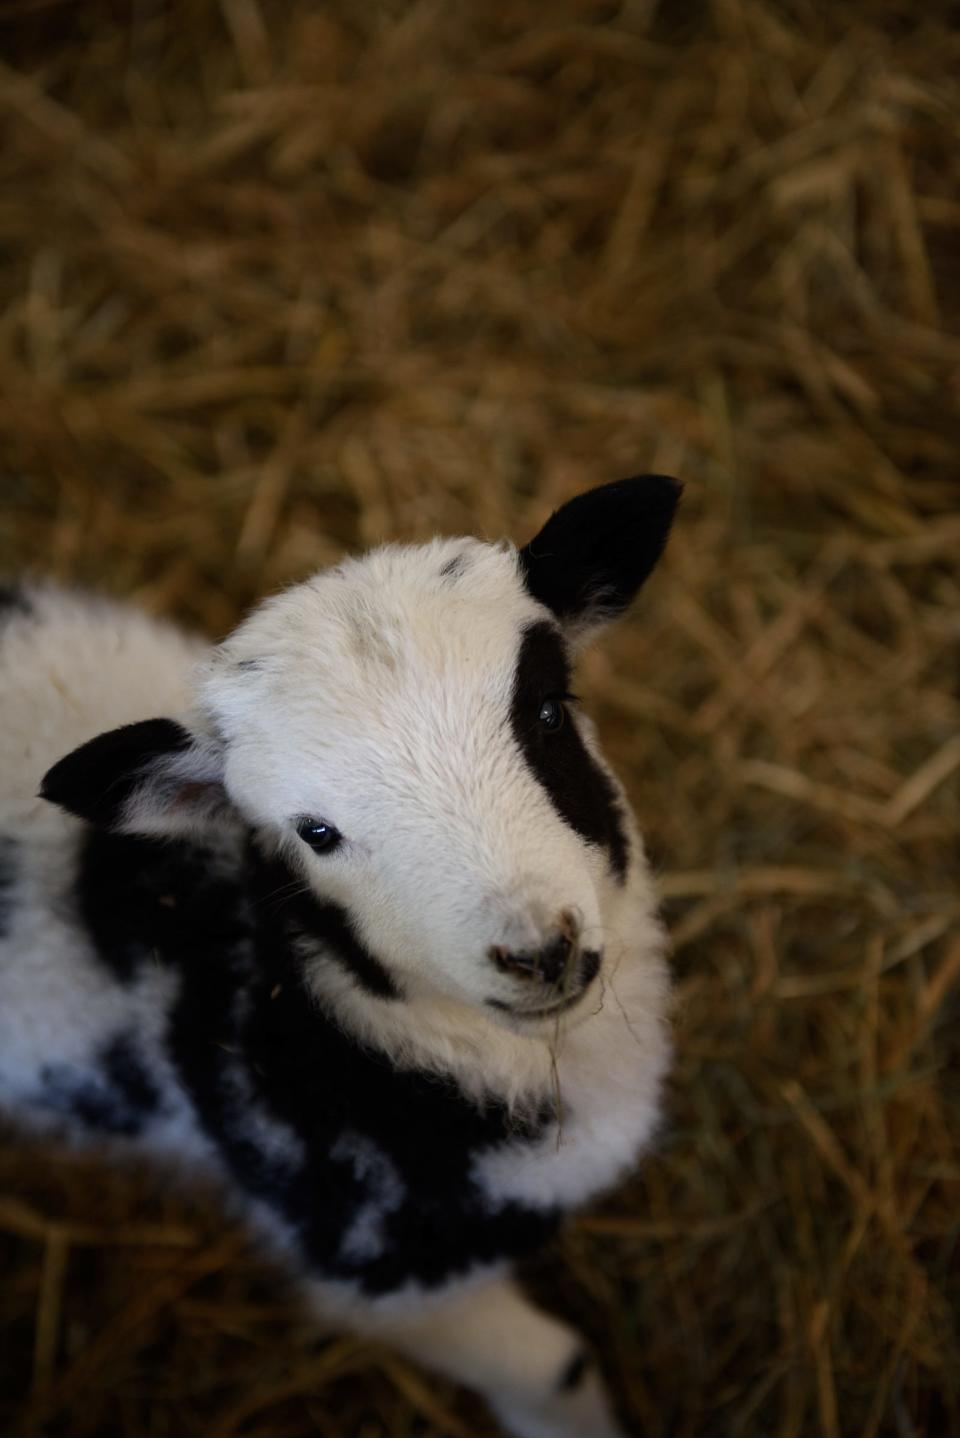 Jacob sheep will be part of the Baby Animals: Heritage Breeds at the Banke event in Portsmouth.